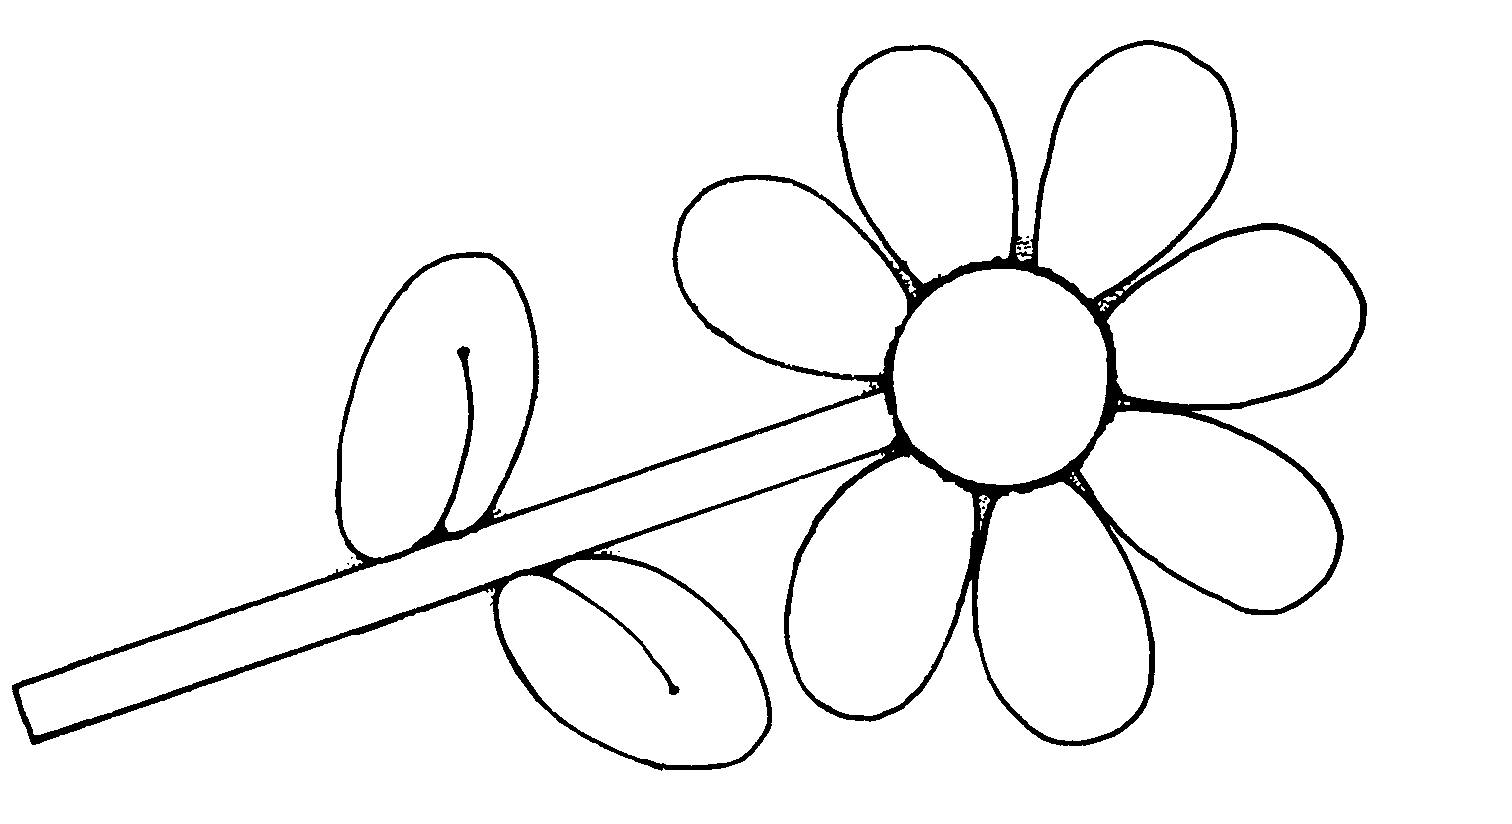 Black and white clipart images of flowers